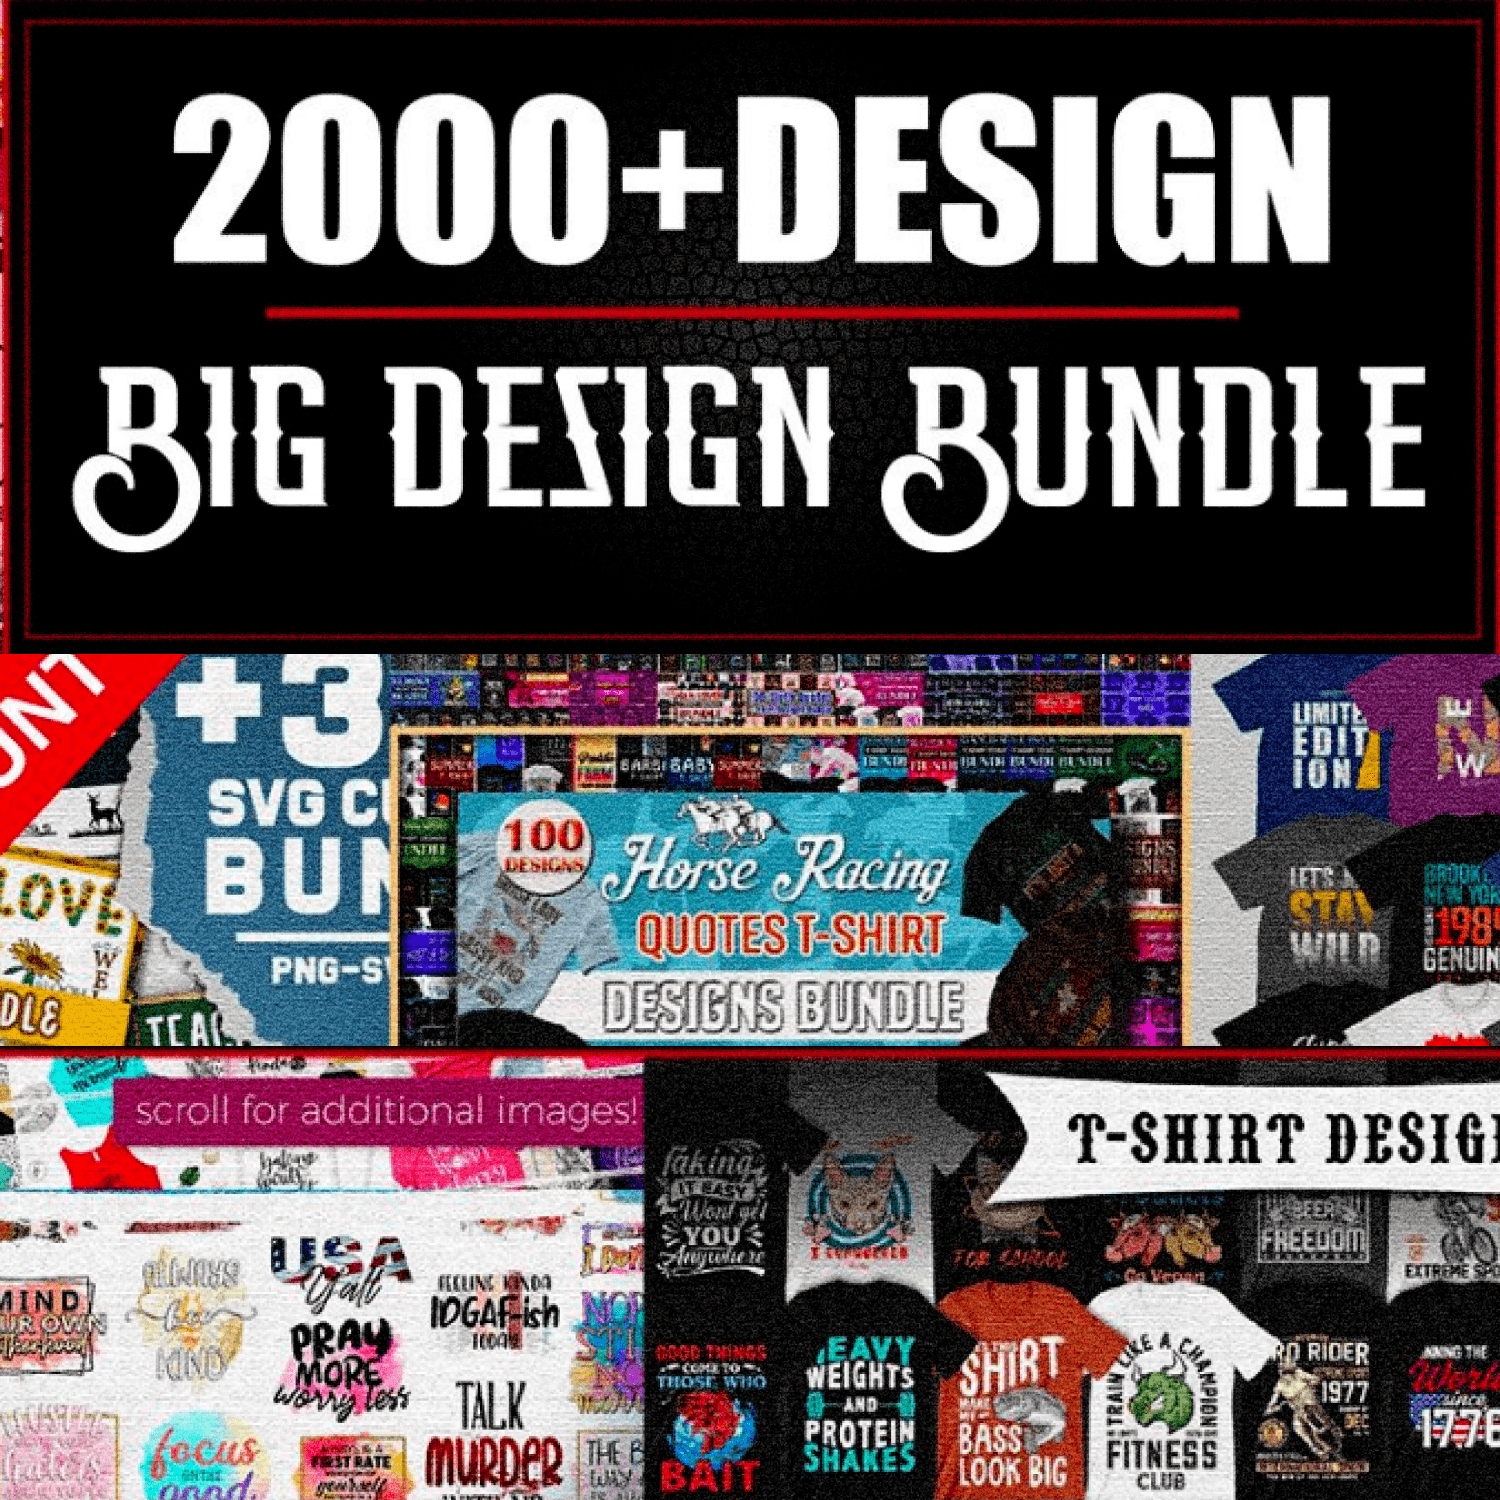 This design bundle is a great choice for your visual content.